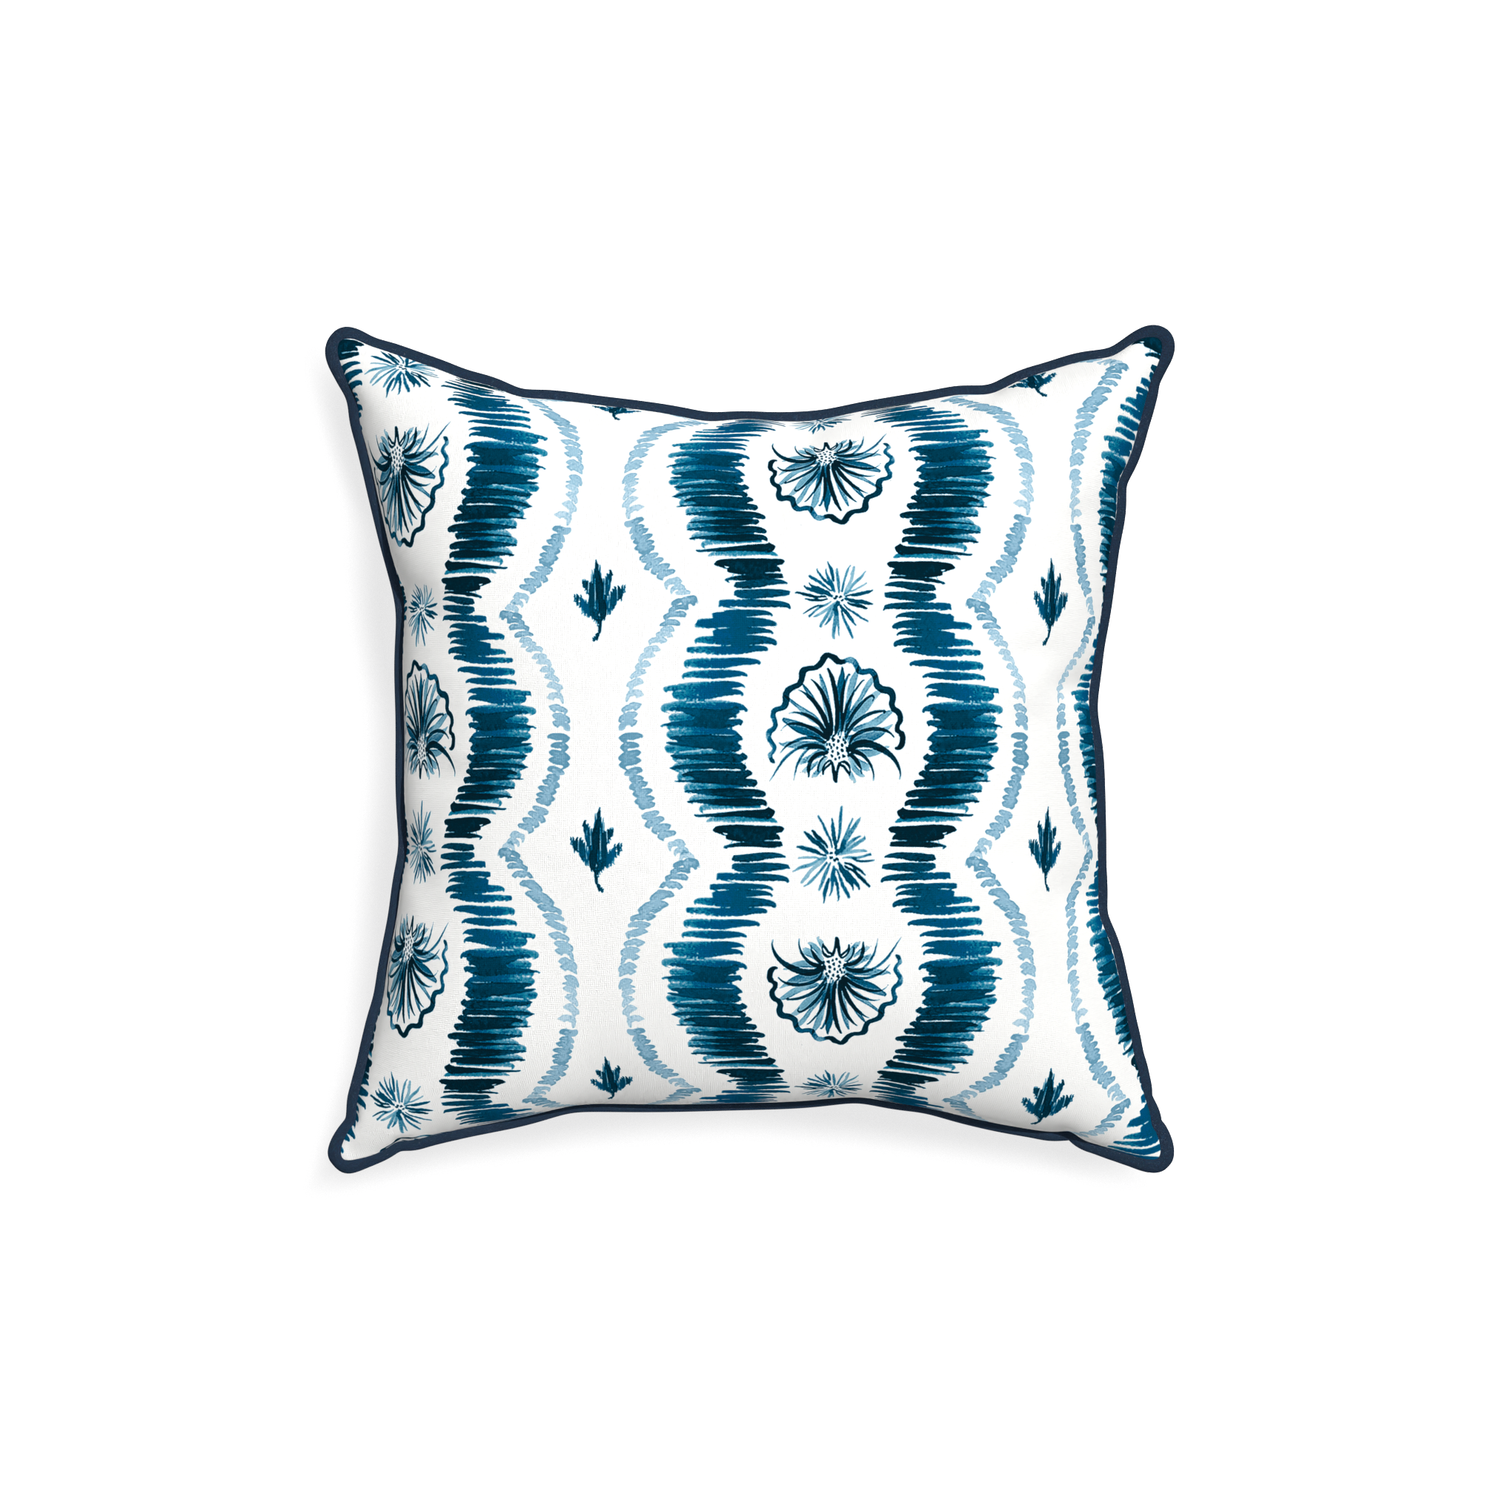 18-square alice custom blue ikatpillow with c piping on white background